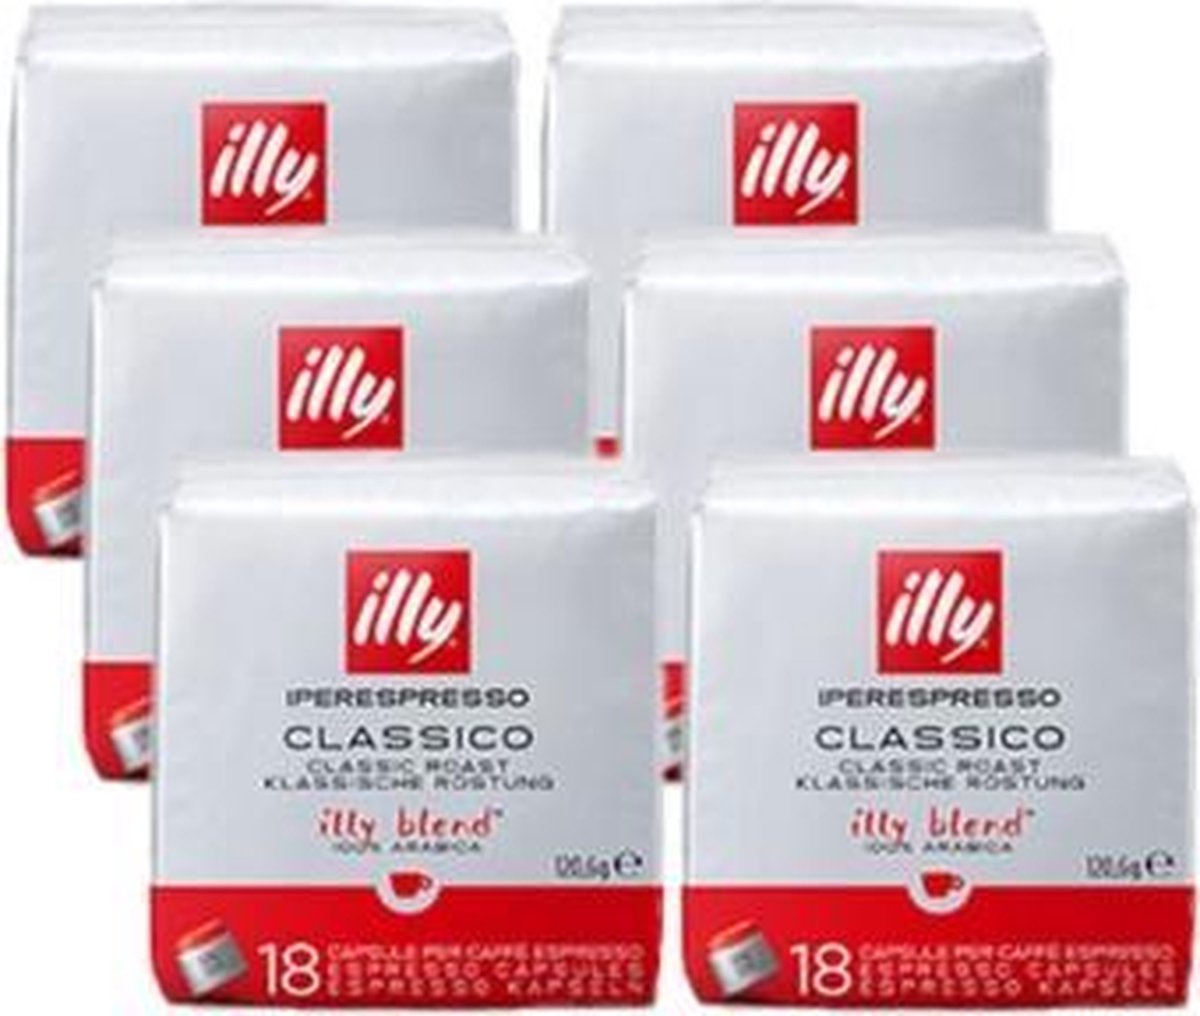 illy - Iperespresso koffie home classico 6 x 18 capsules - illy